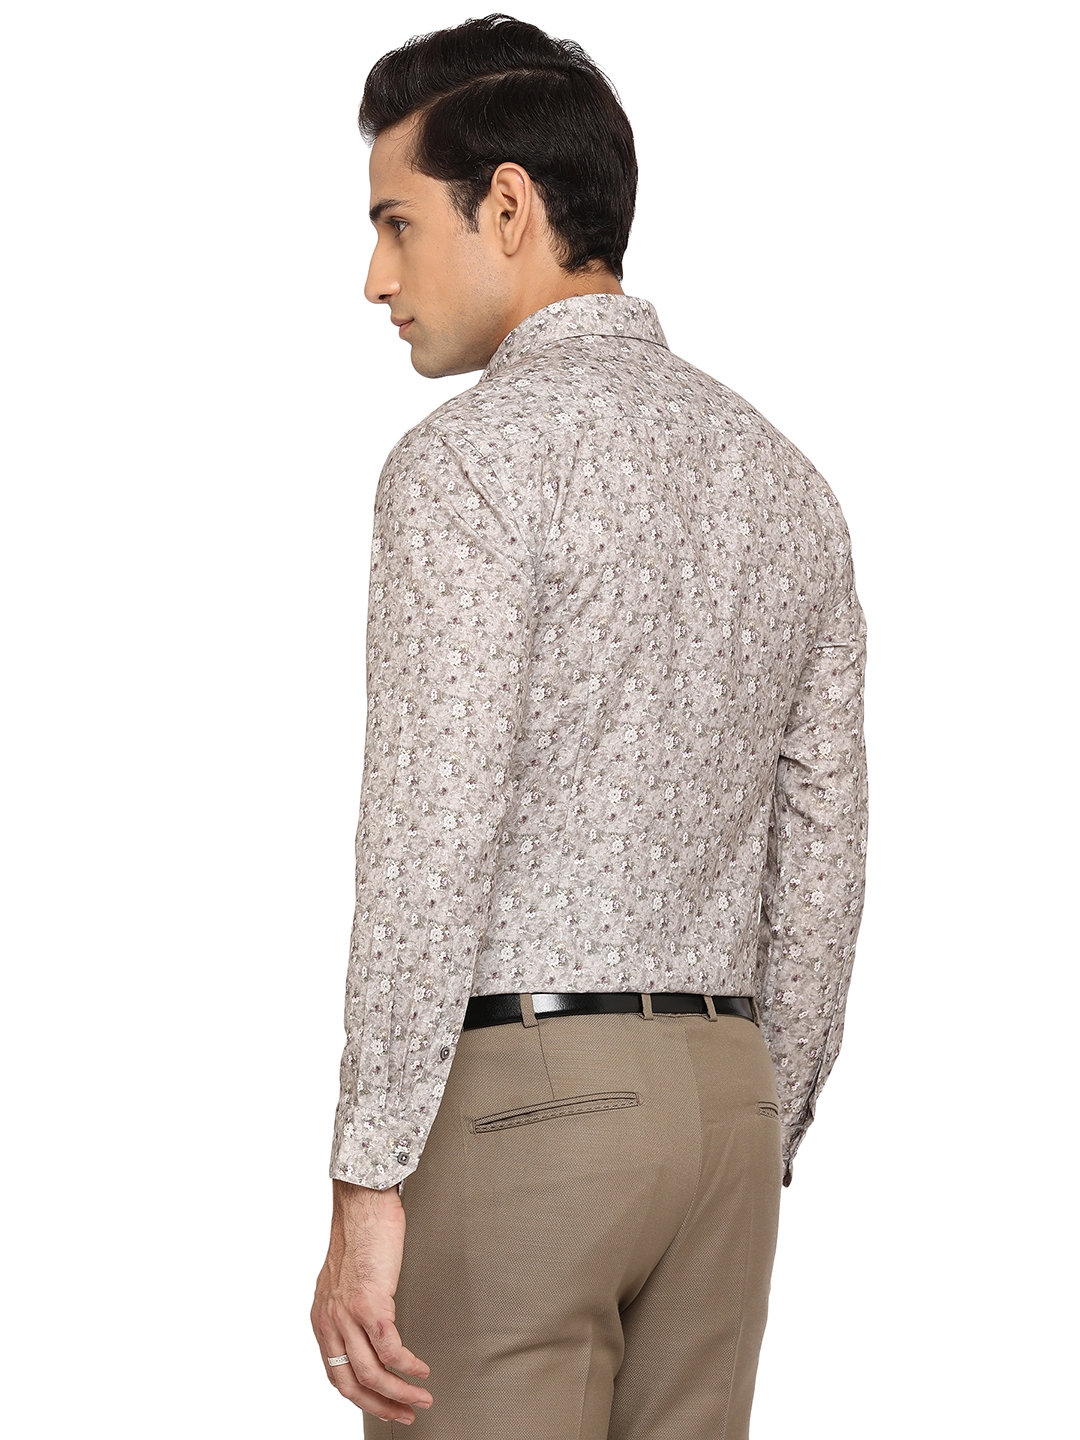 Cement Grey Printed Slim Fit Party Wear Shirt | Greenfibre